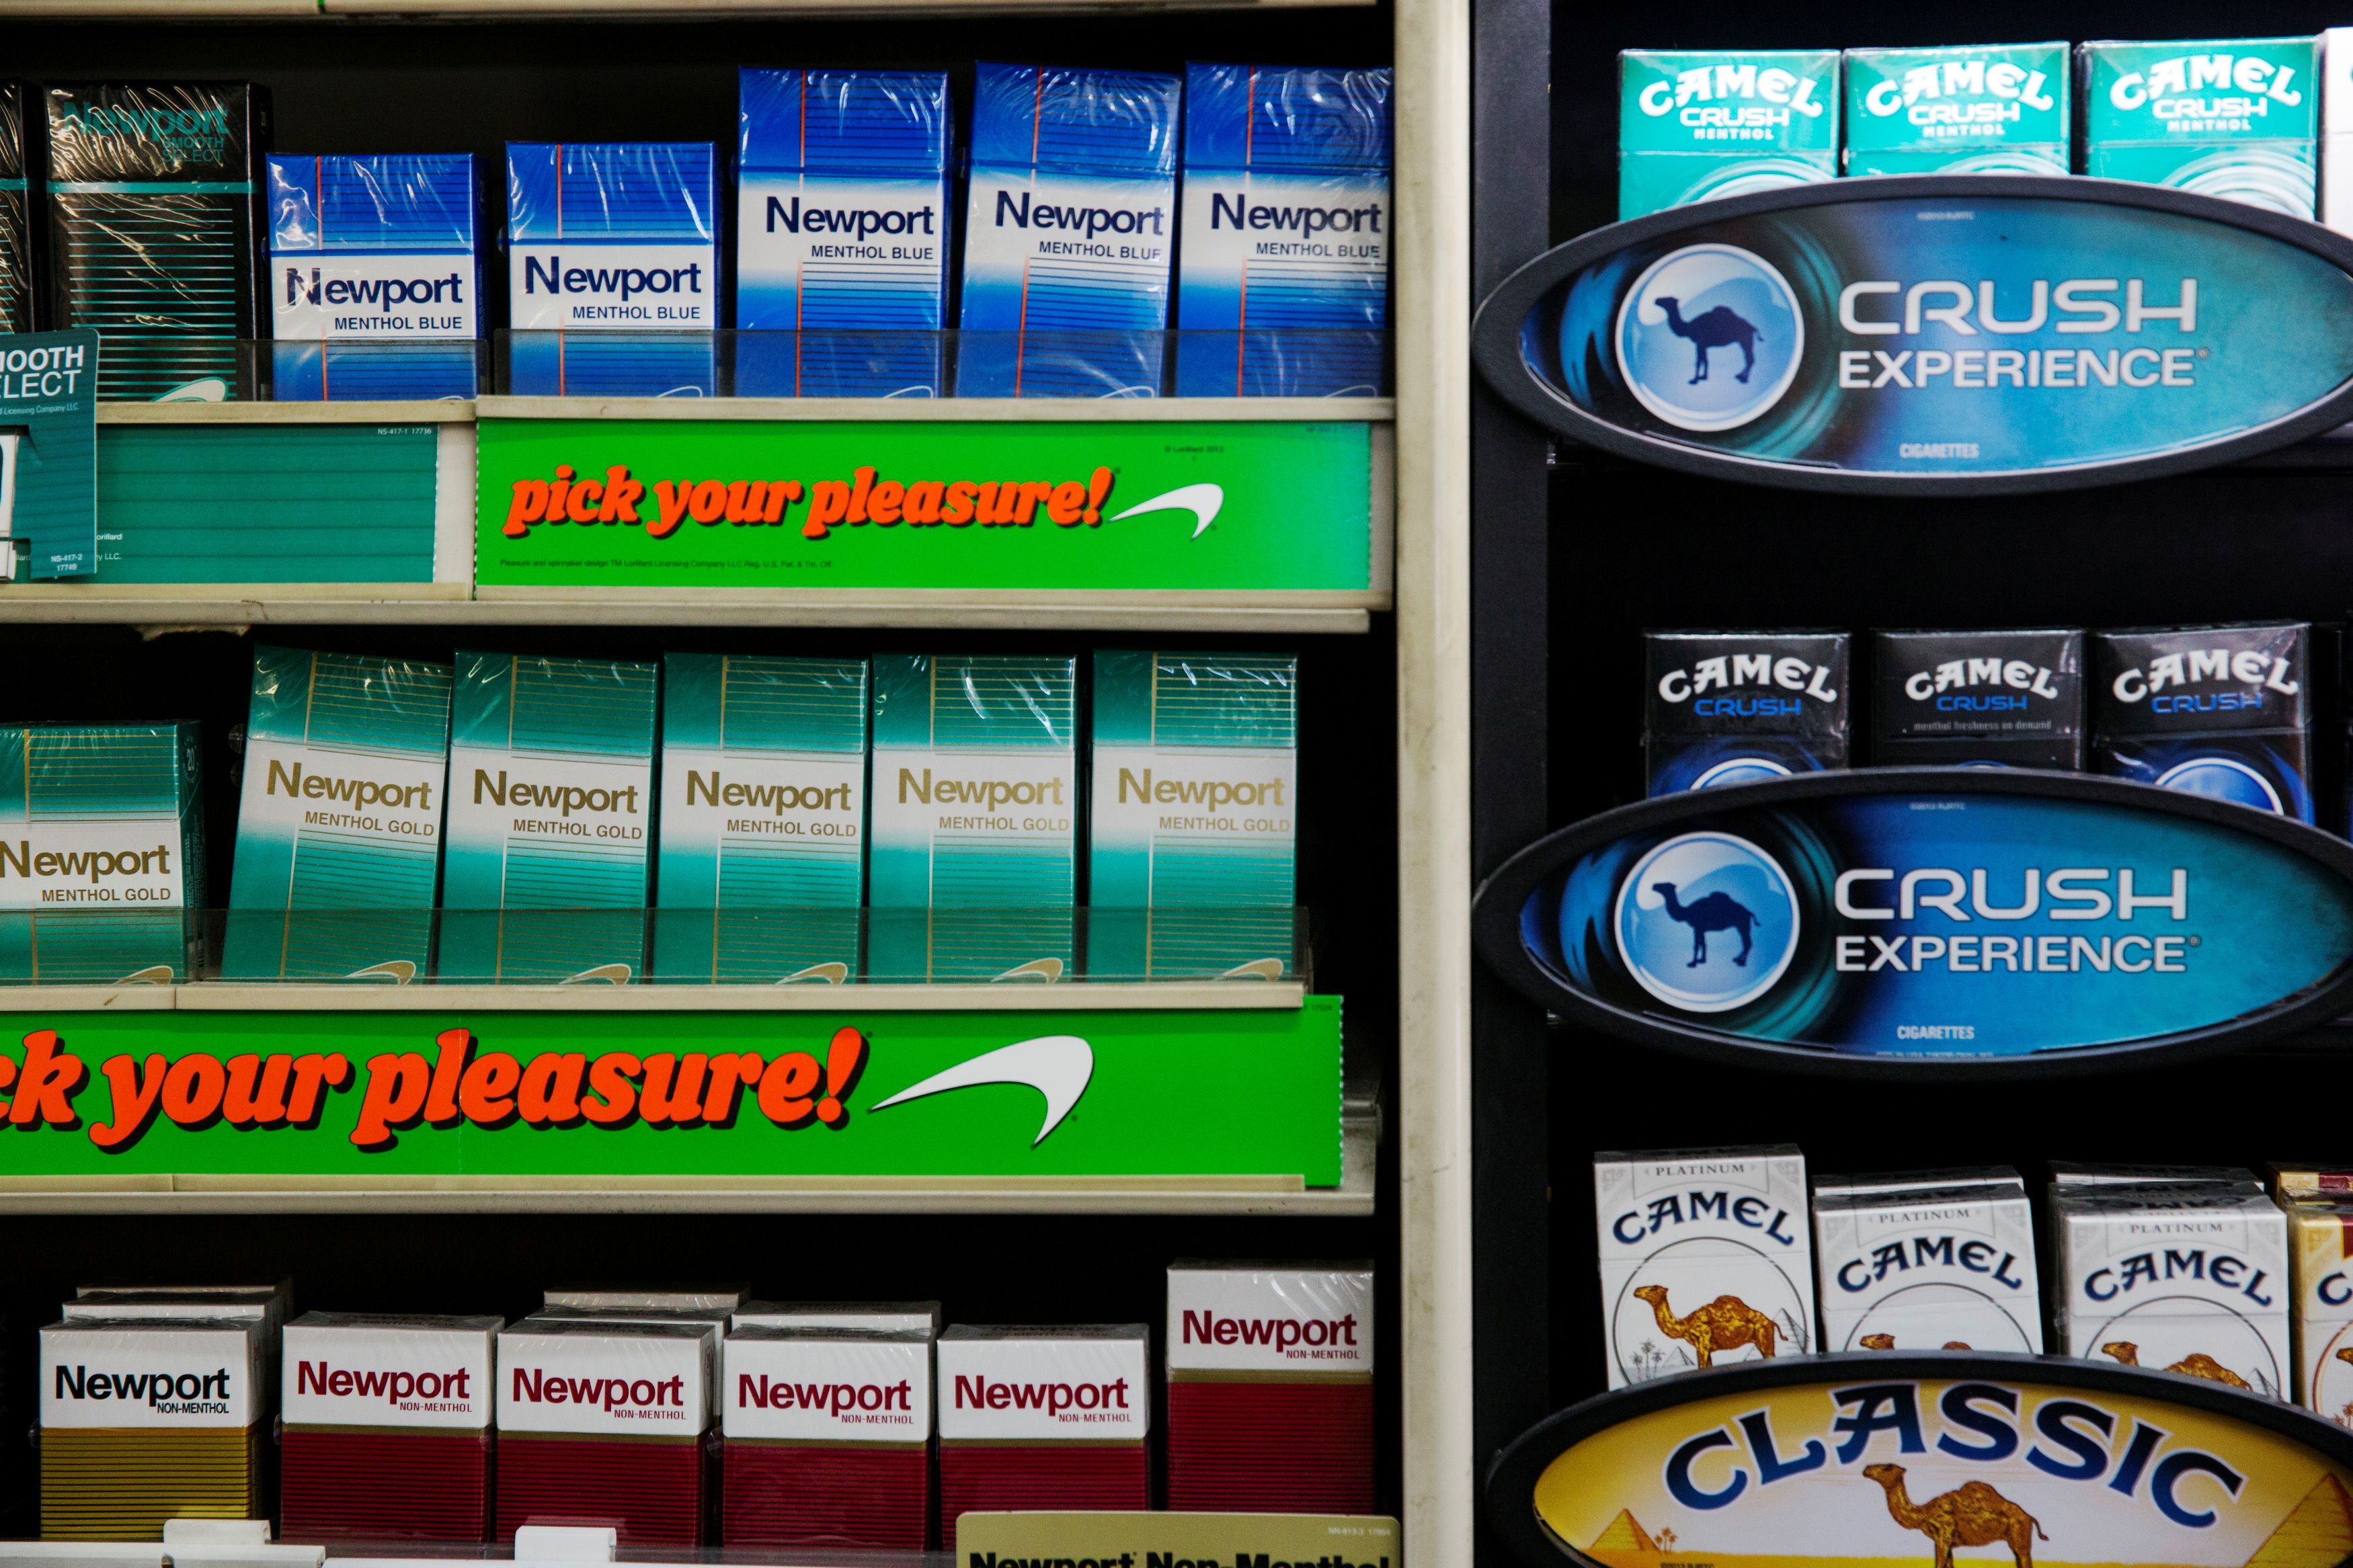 Newport and Camel cigarettes are stacked on a shelf inside a tobacco store in New York July 11, 2014. REUTERS/Lucas Jackson